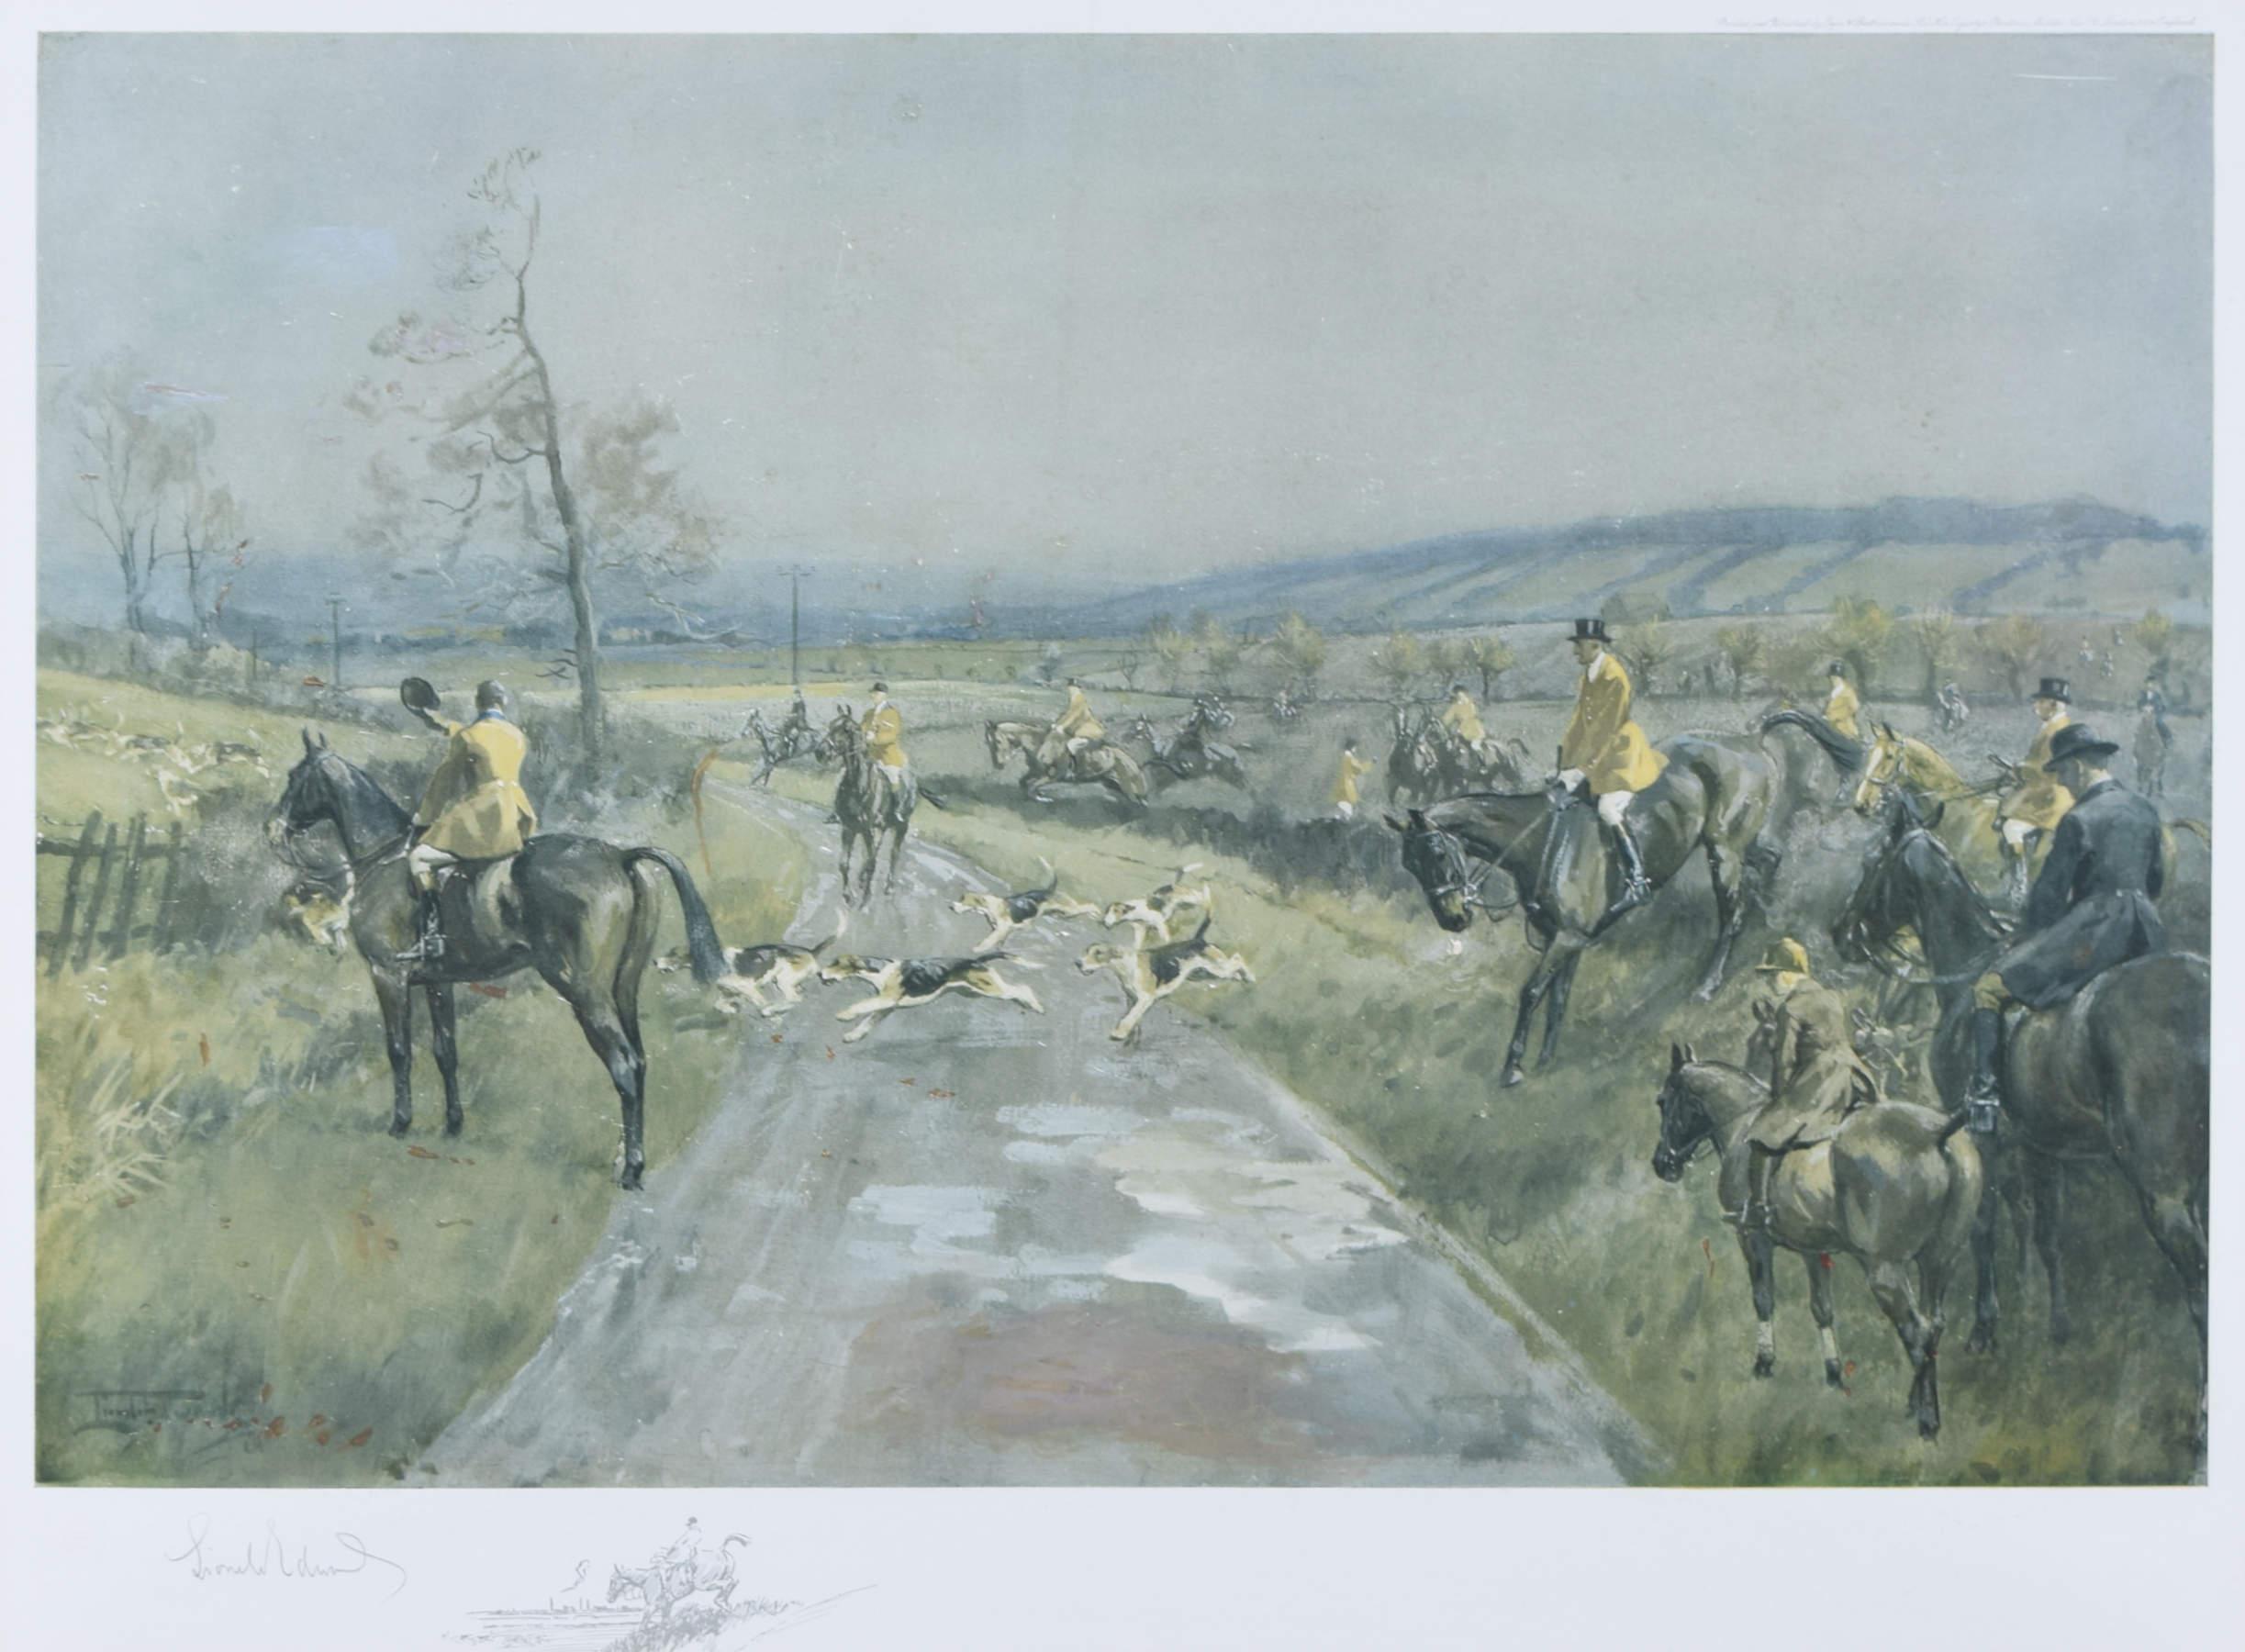 To see our other hunting pictures, scroll down to "More from this Seller" and below it click on "See all from this Seller" and then search.

Lionel Edwards (1878 - 1966)
The South Notts Hunt (1928)
Lithograph
31 x 51 cm

Signed and dated in plate